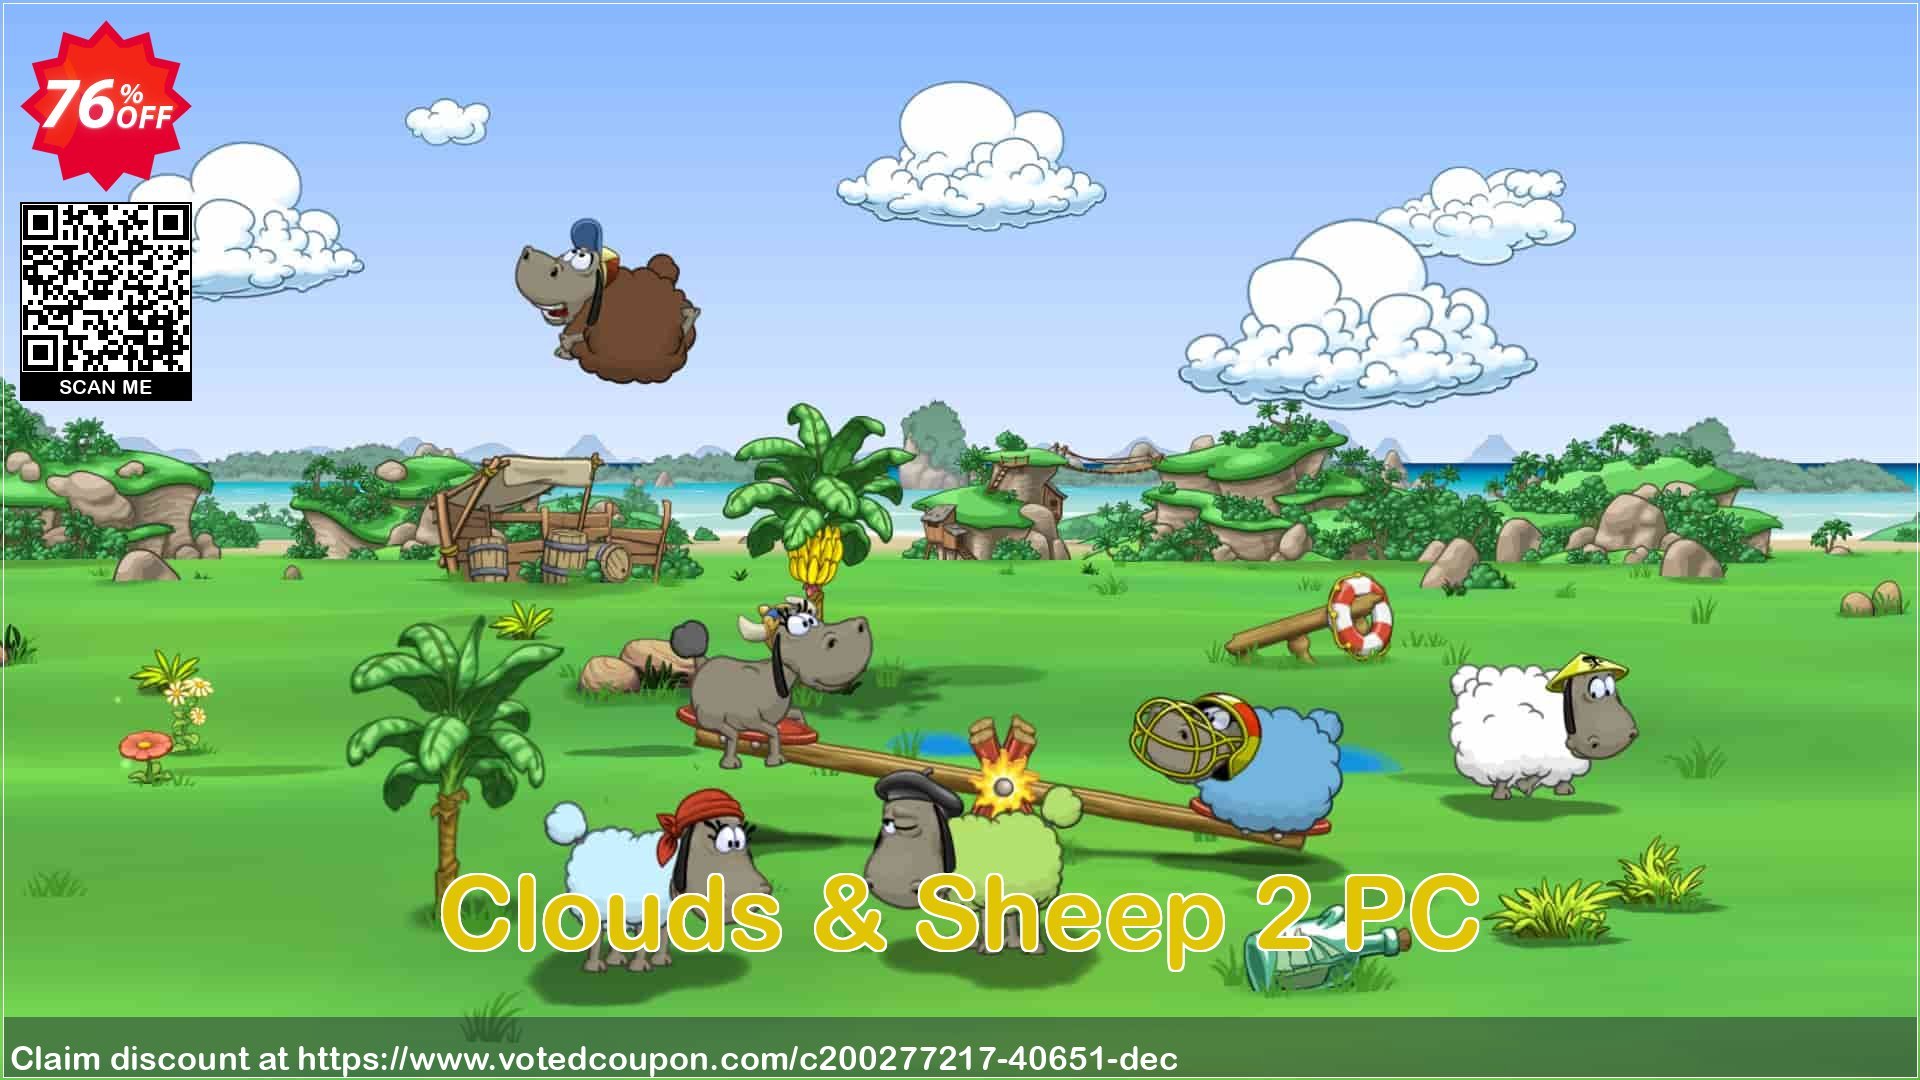 Clouds & Sheep 2 PC Coupon Code May 2024, 76% OFF - VotedCoupon